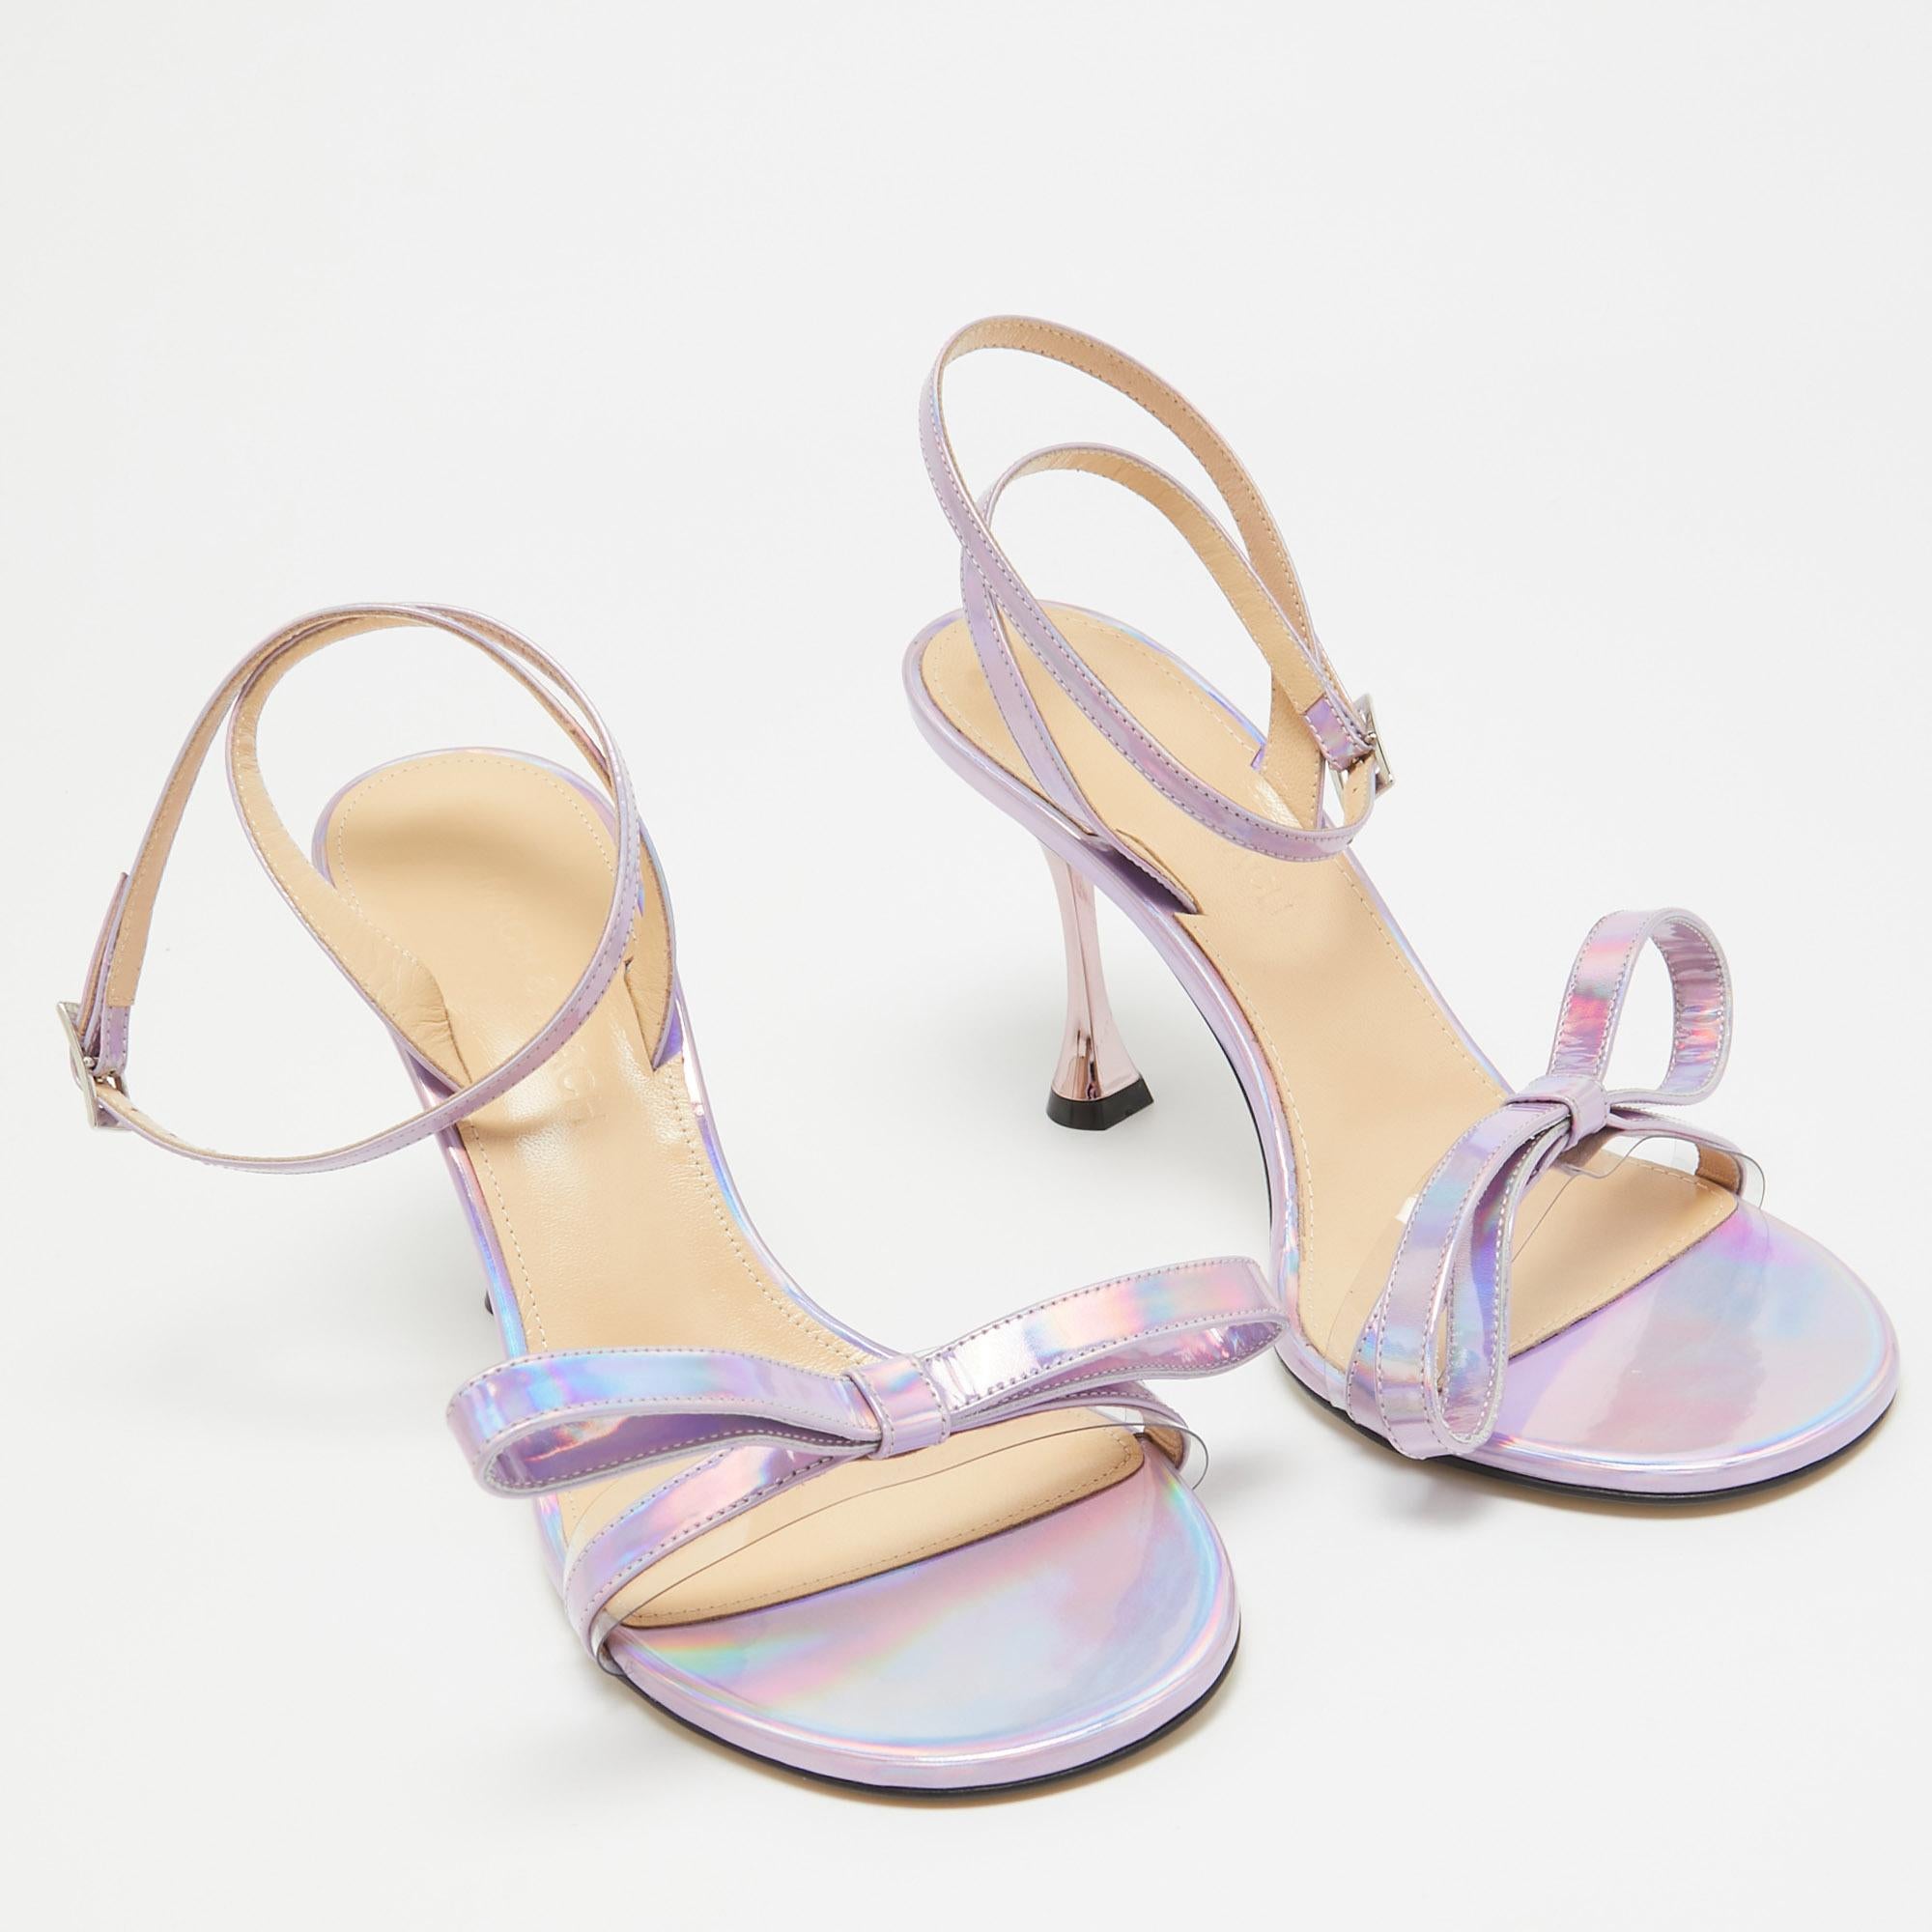 Mach & Mach Iridescent Purple Patent Leather and PVC French Bow Sandals Size 37. For Sale 1